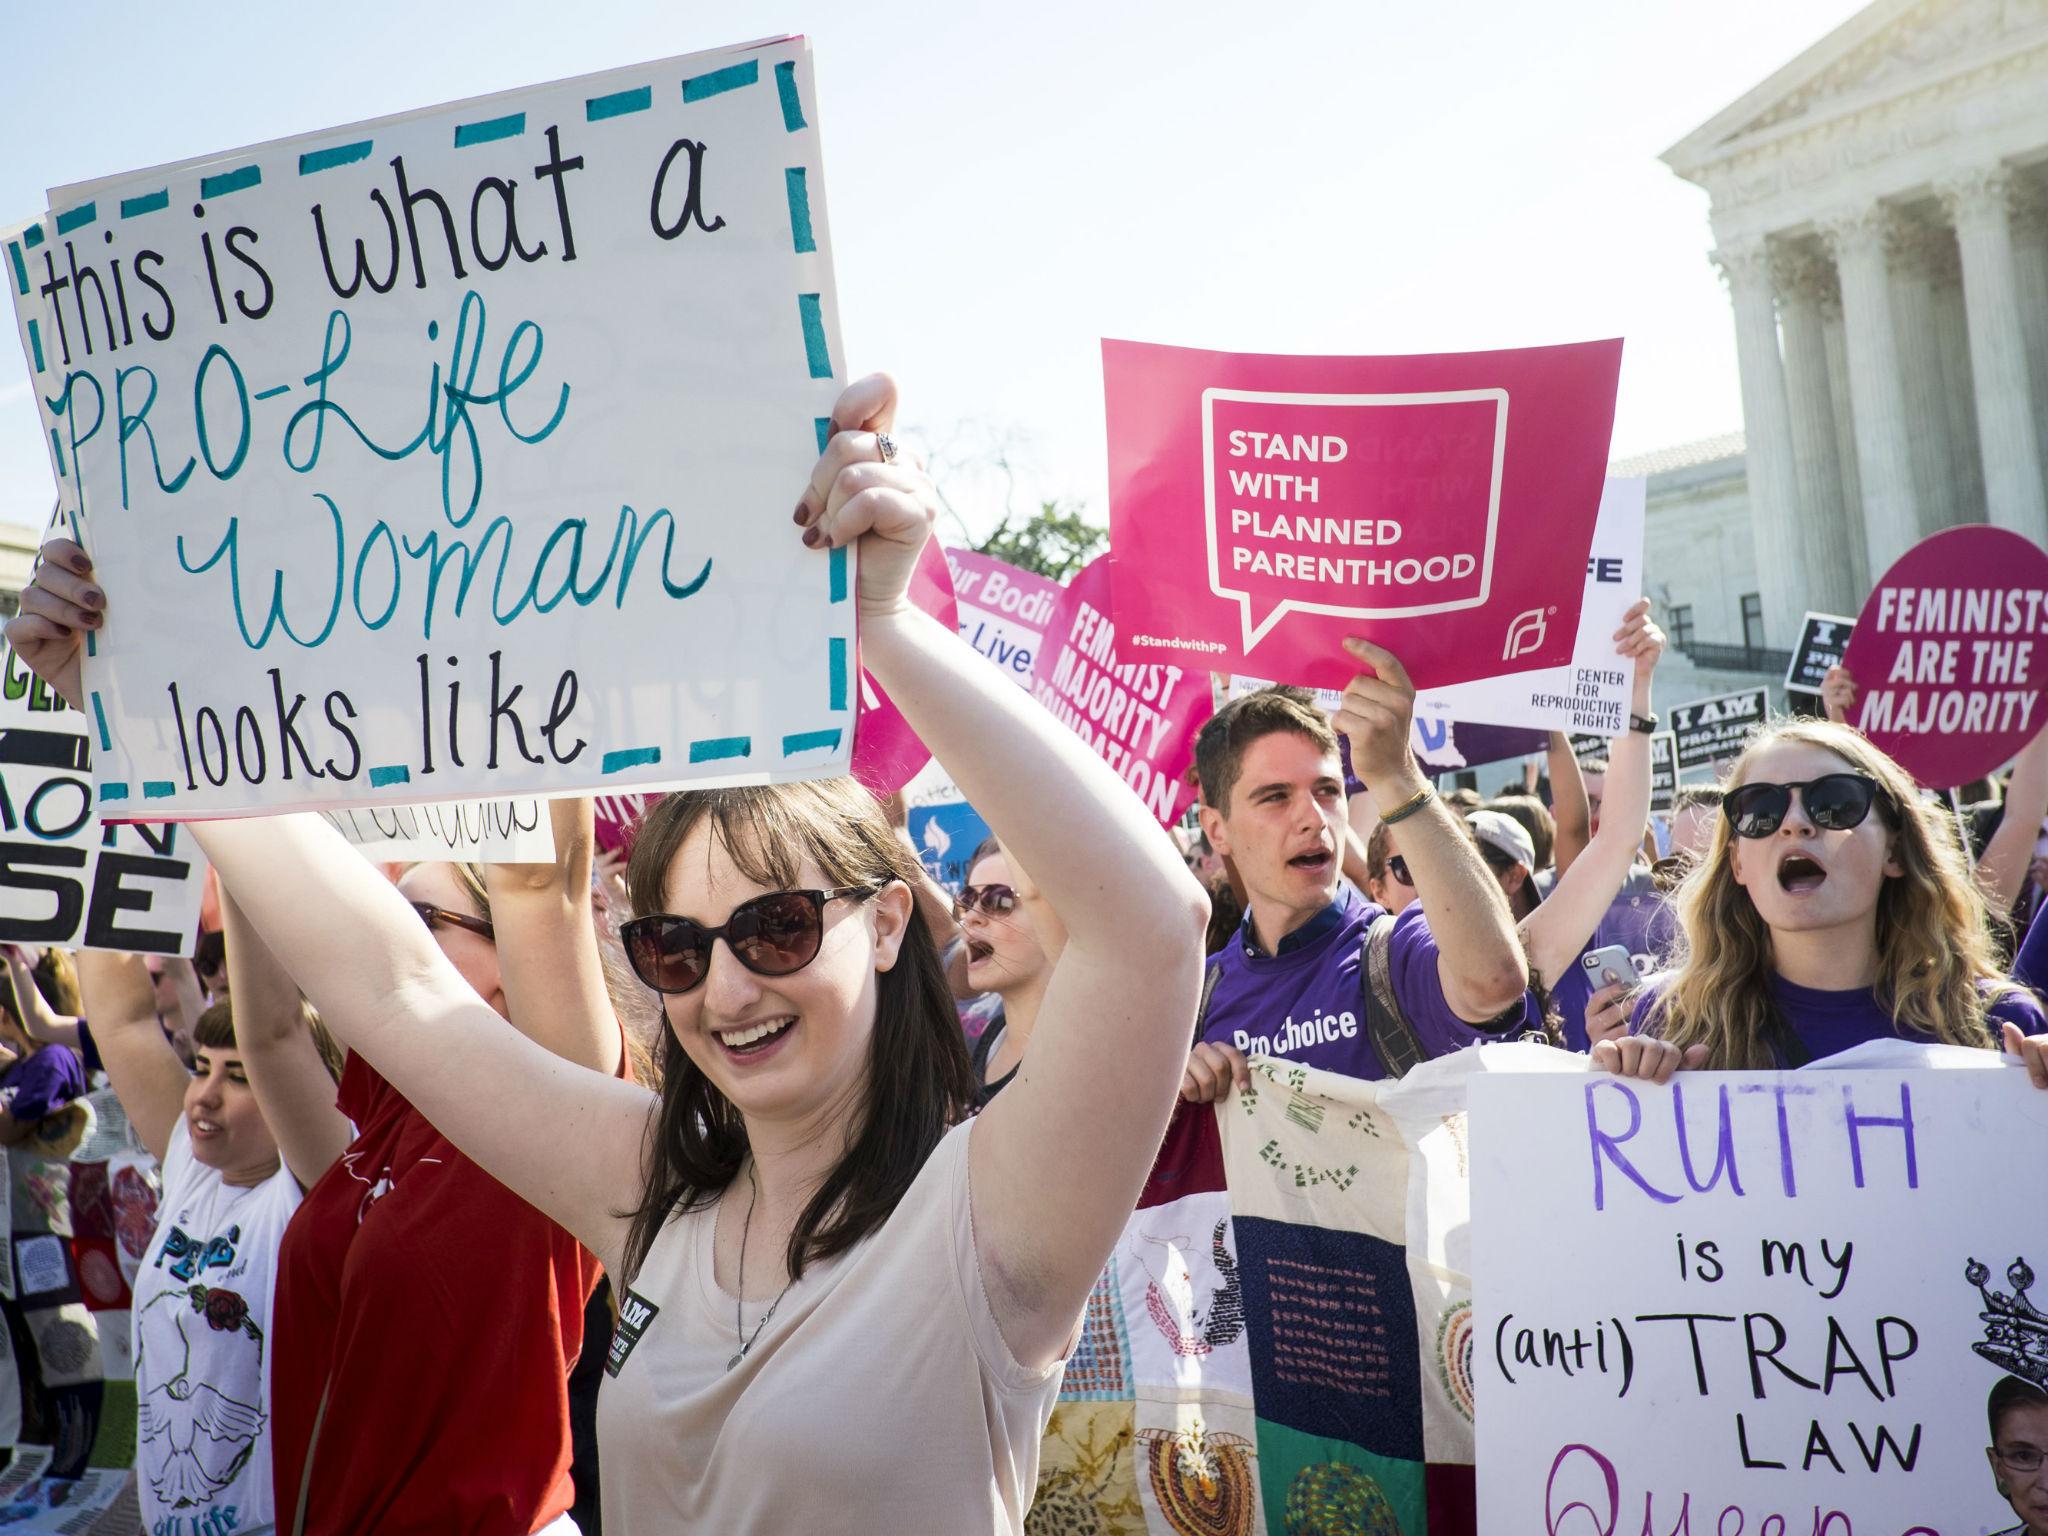 Pro-choice and pro-life activists demonstrate on the steps of the US Supreme Court